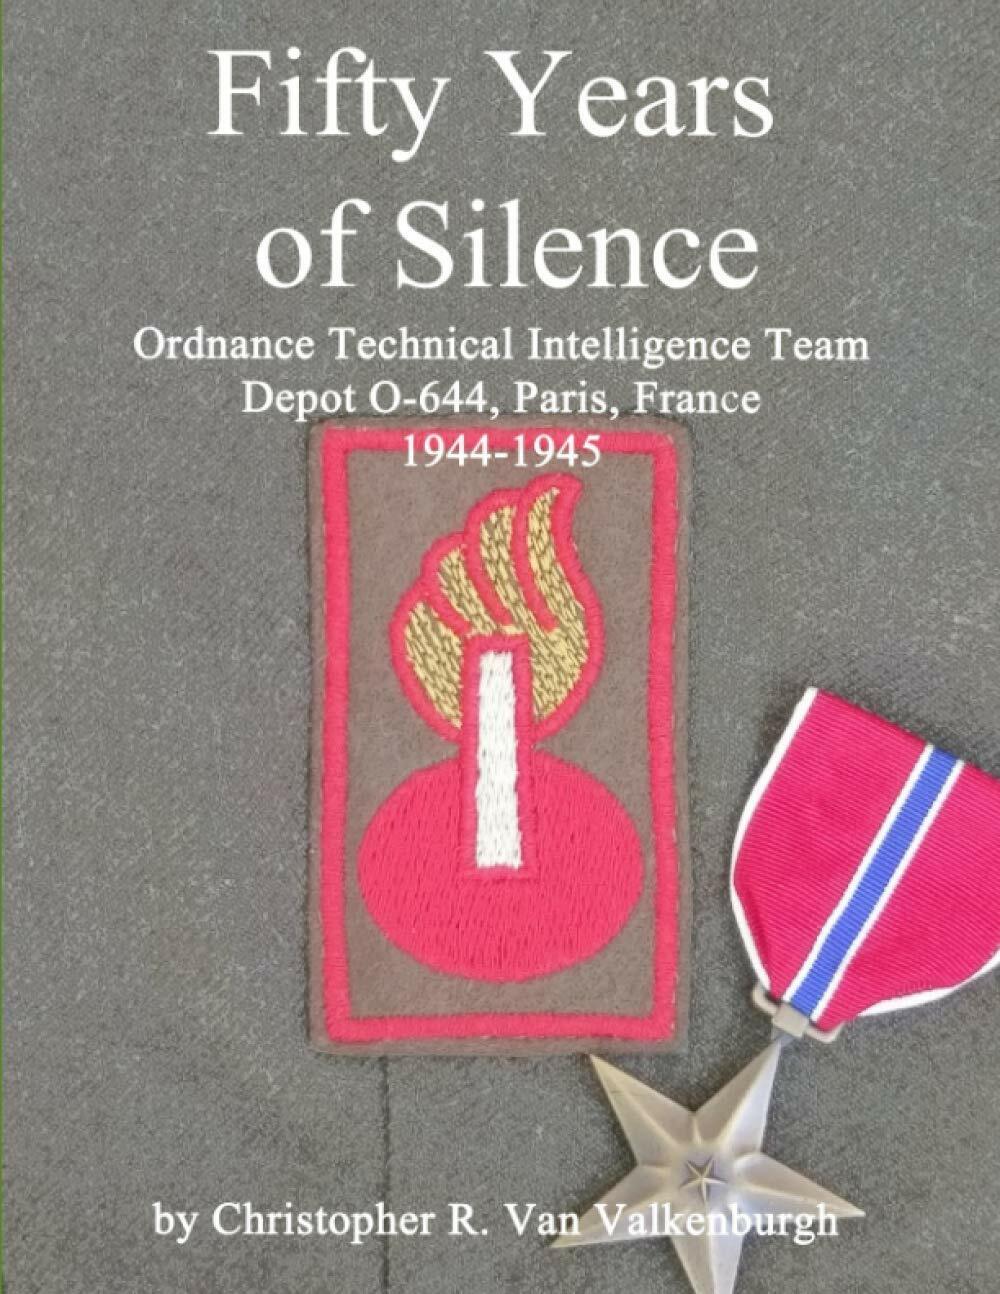 Fifty Years of Silence Ordnance Technical Intelligence Team, Depot O-644, Paris,